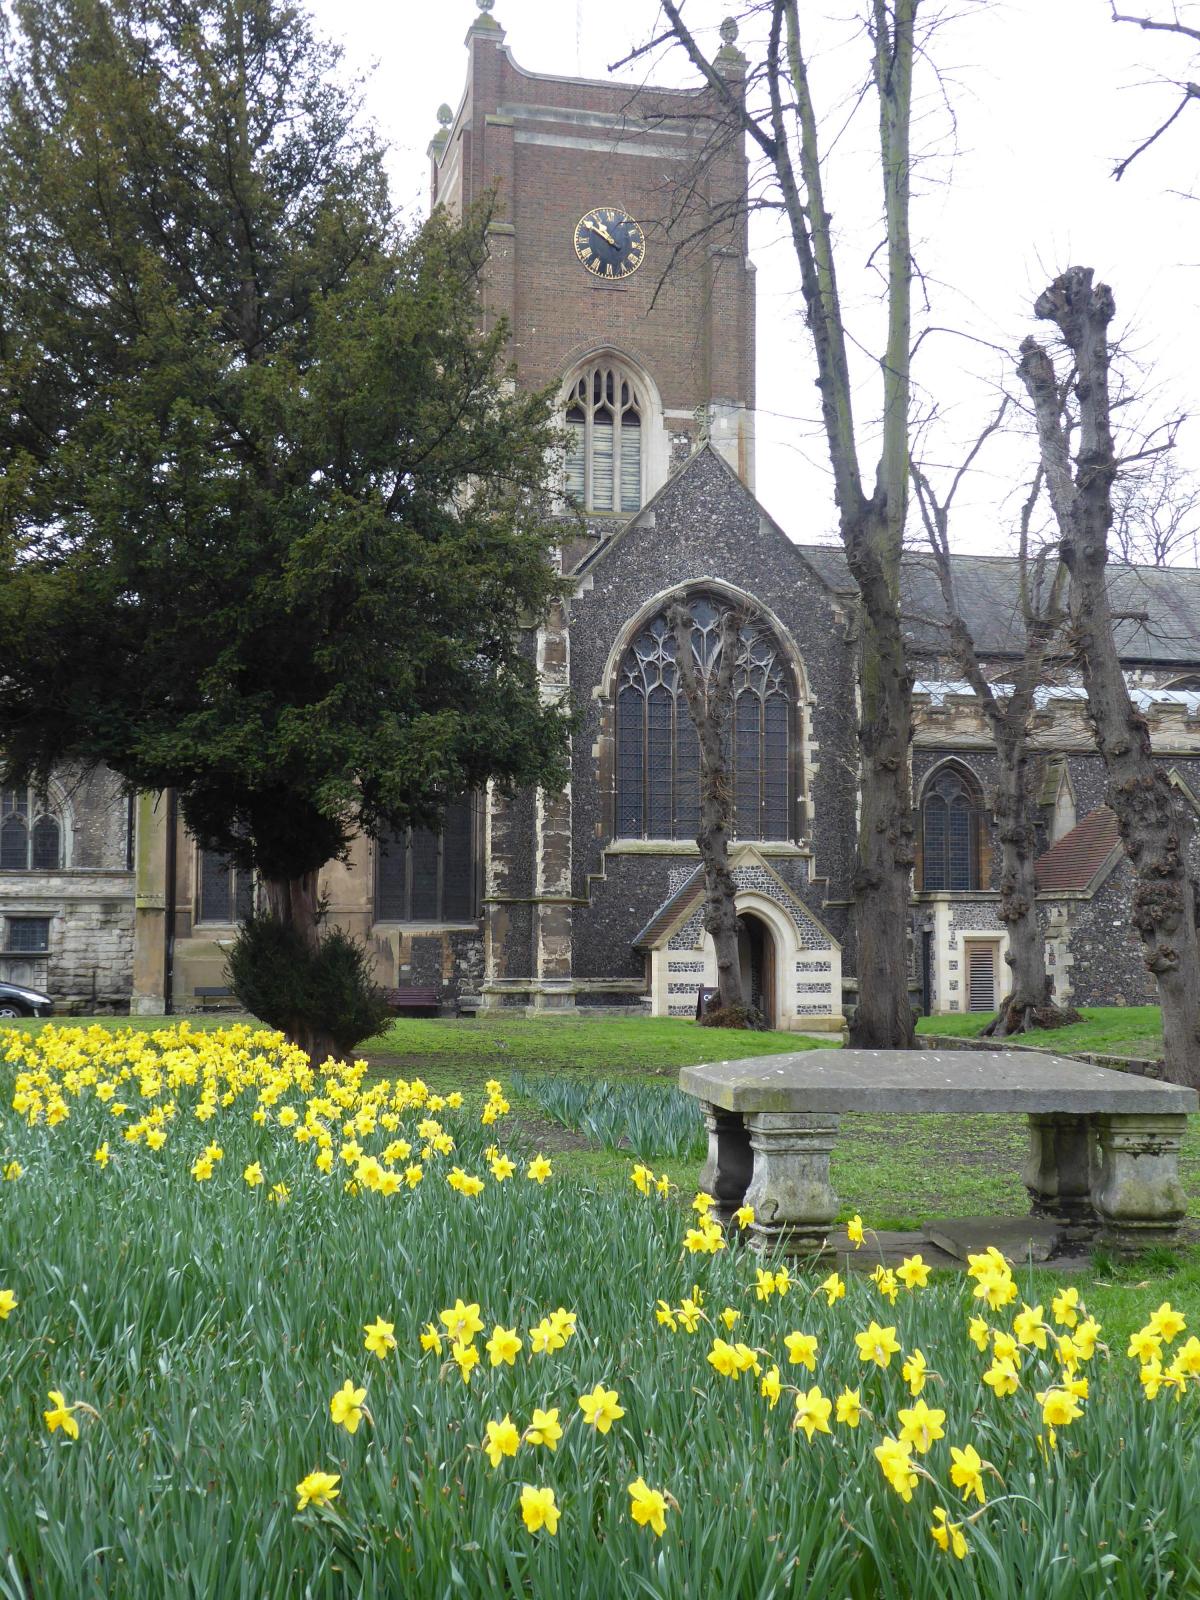 Verna Evans sent in this photo of the daffodils outside All Saints Church in Kingston